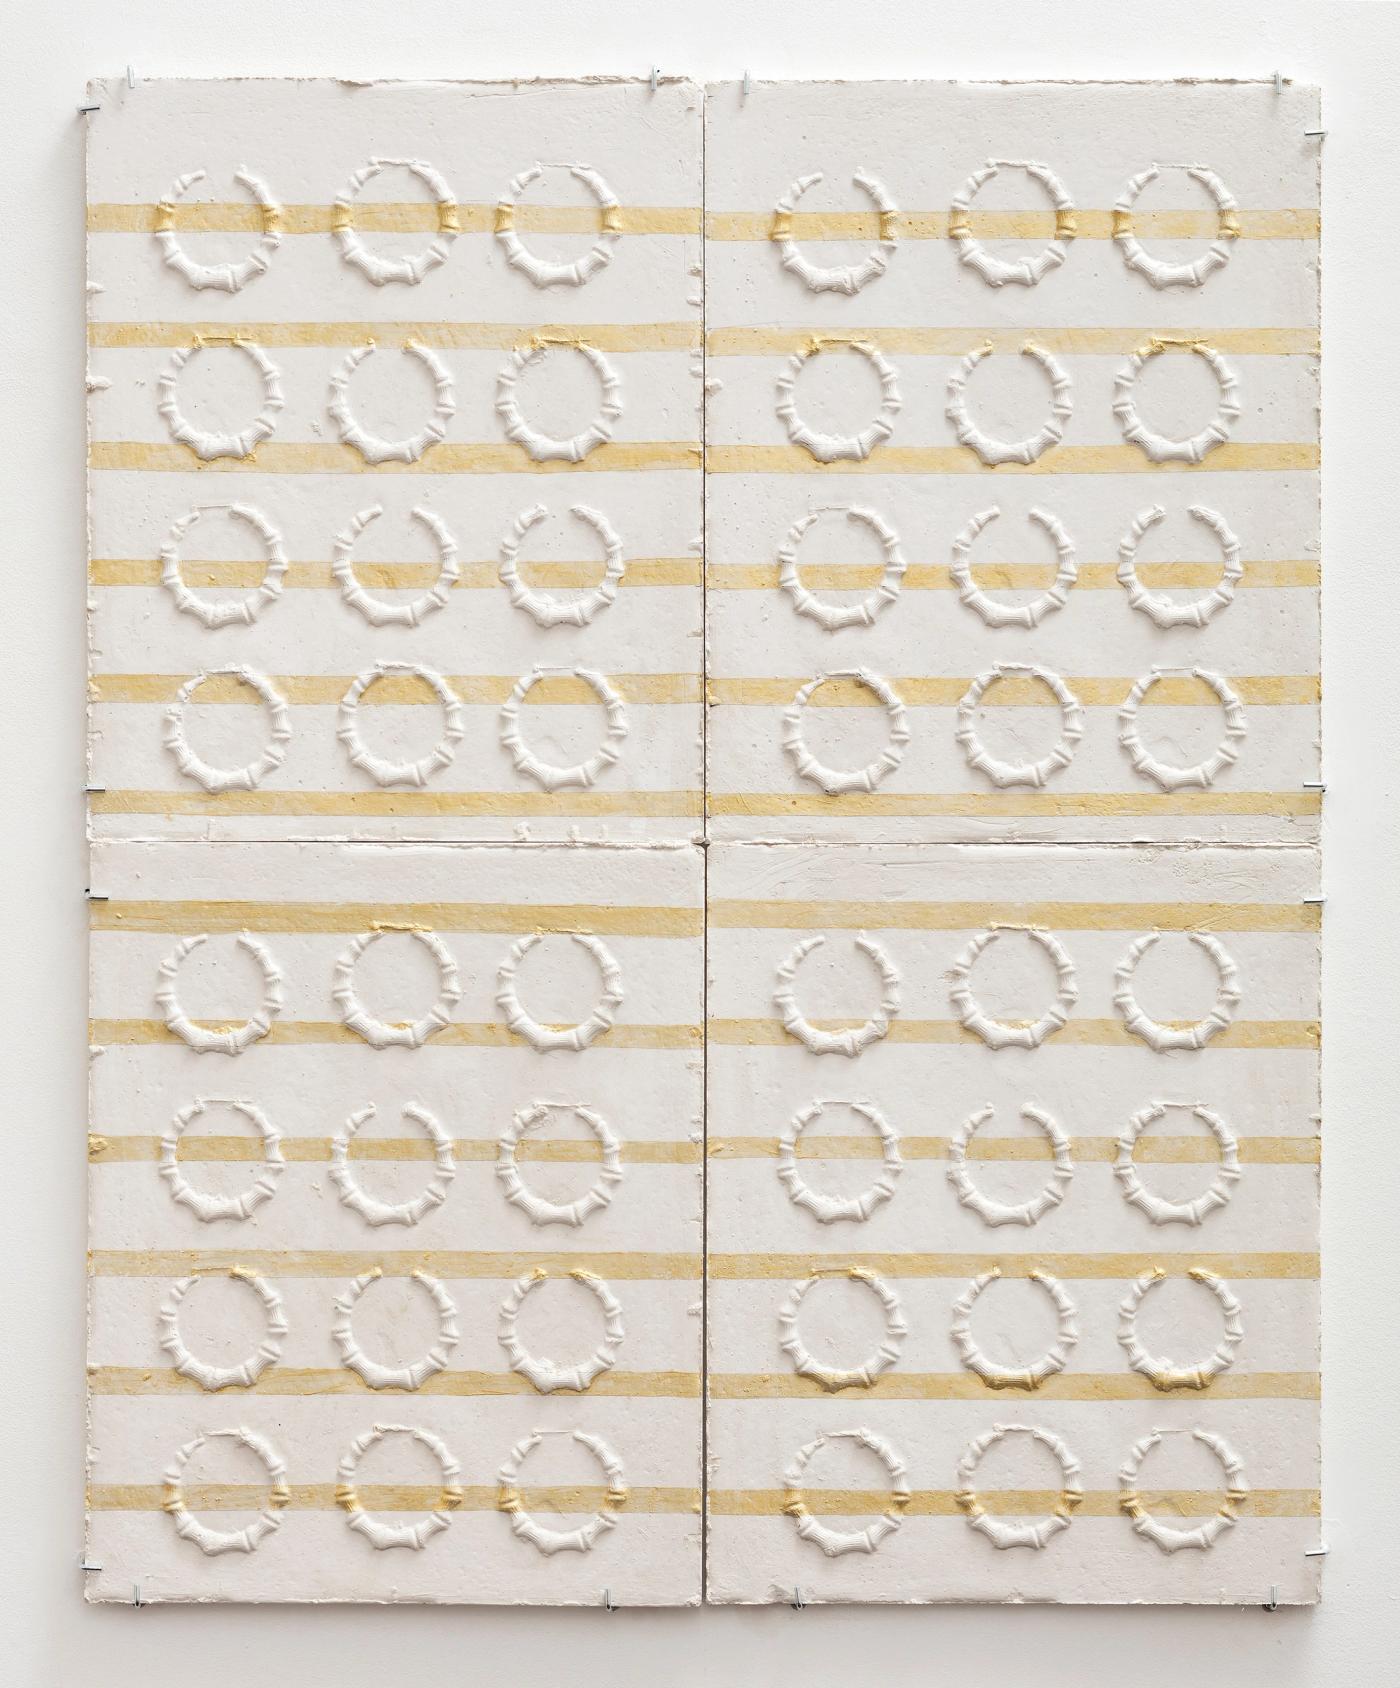 Image of Round Bamboo Earrings with Gold Lines Relief, 2018: Plaster and acrylic